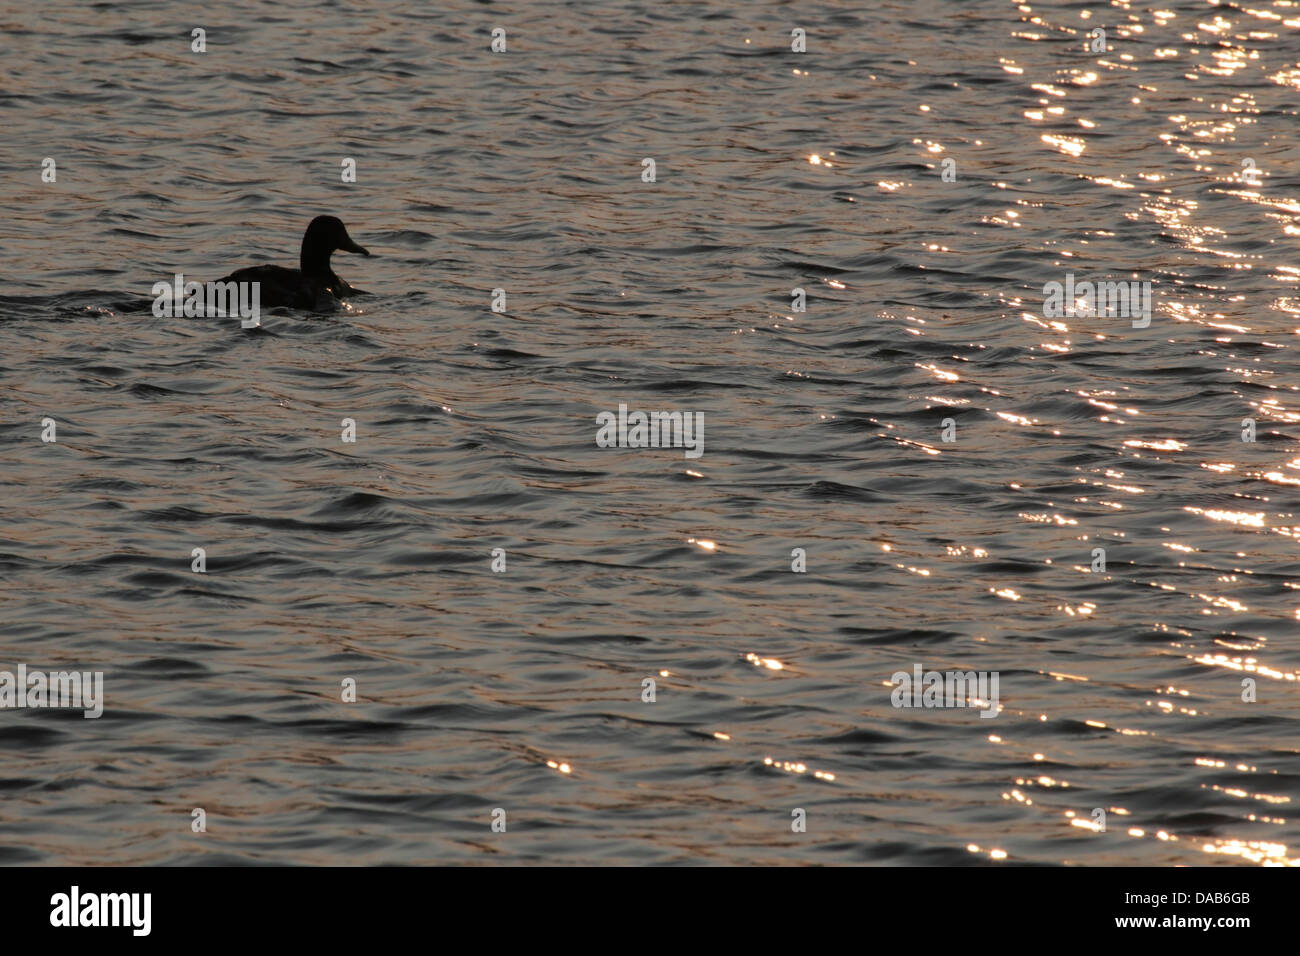 Wild duck swimming in lake in France in the light of the setting sun Stock Photo